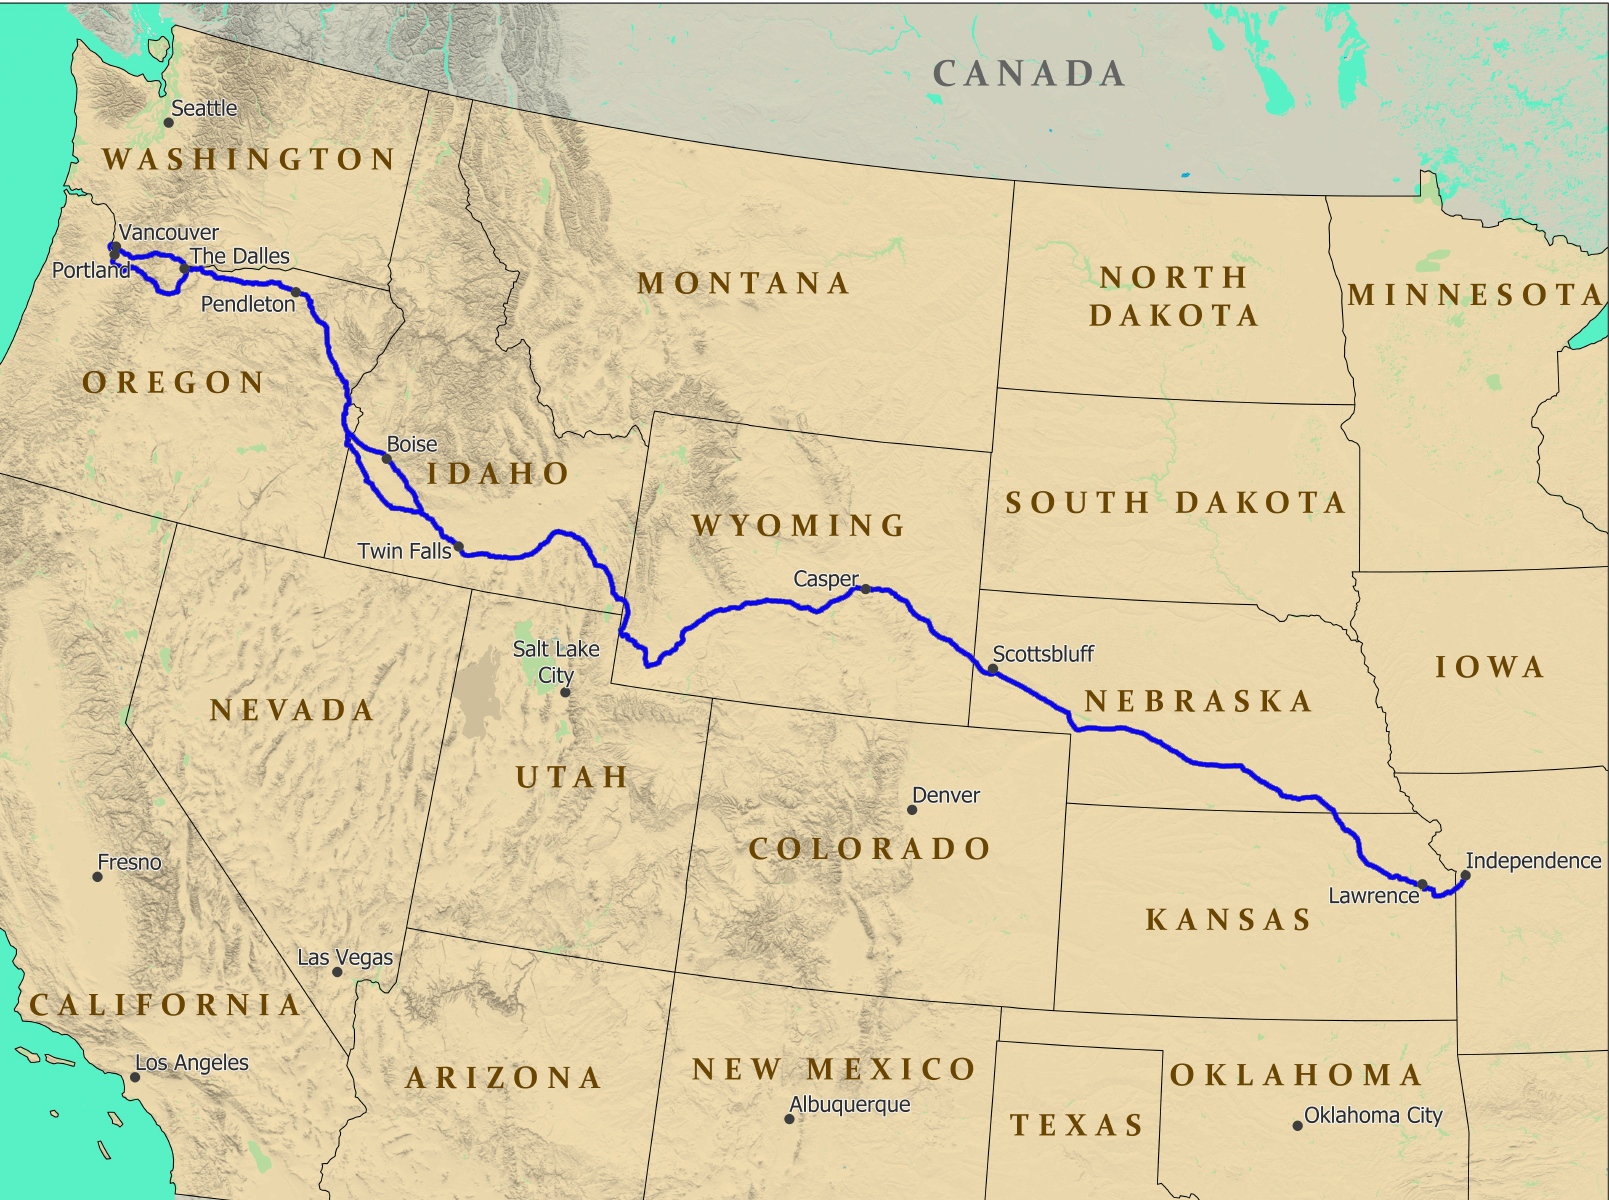 Oregon Trail: Facts, Dates, and Information About the Westward Expansion